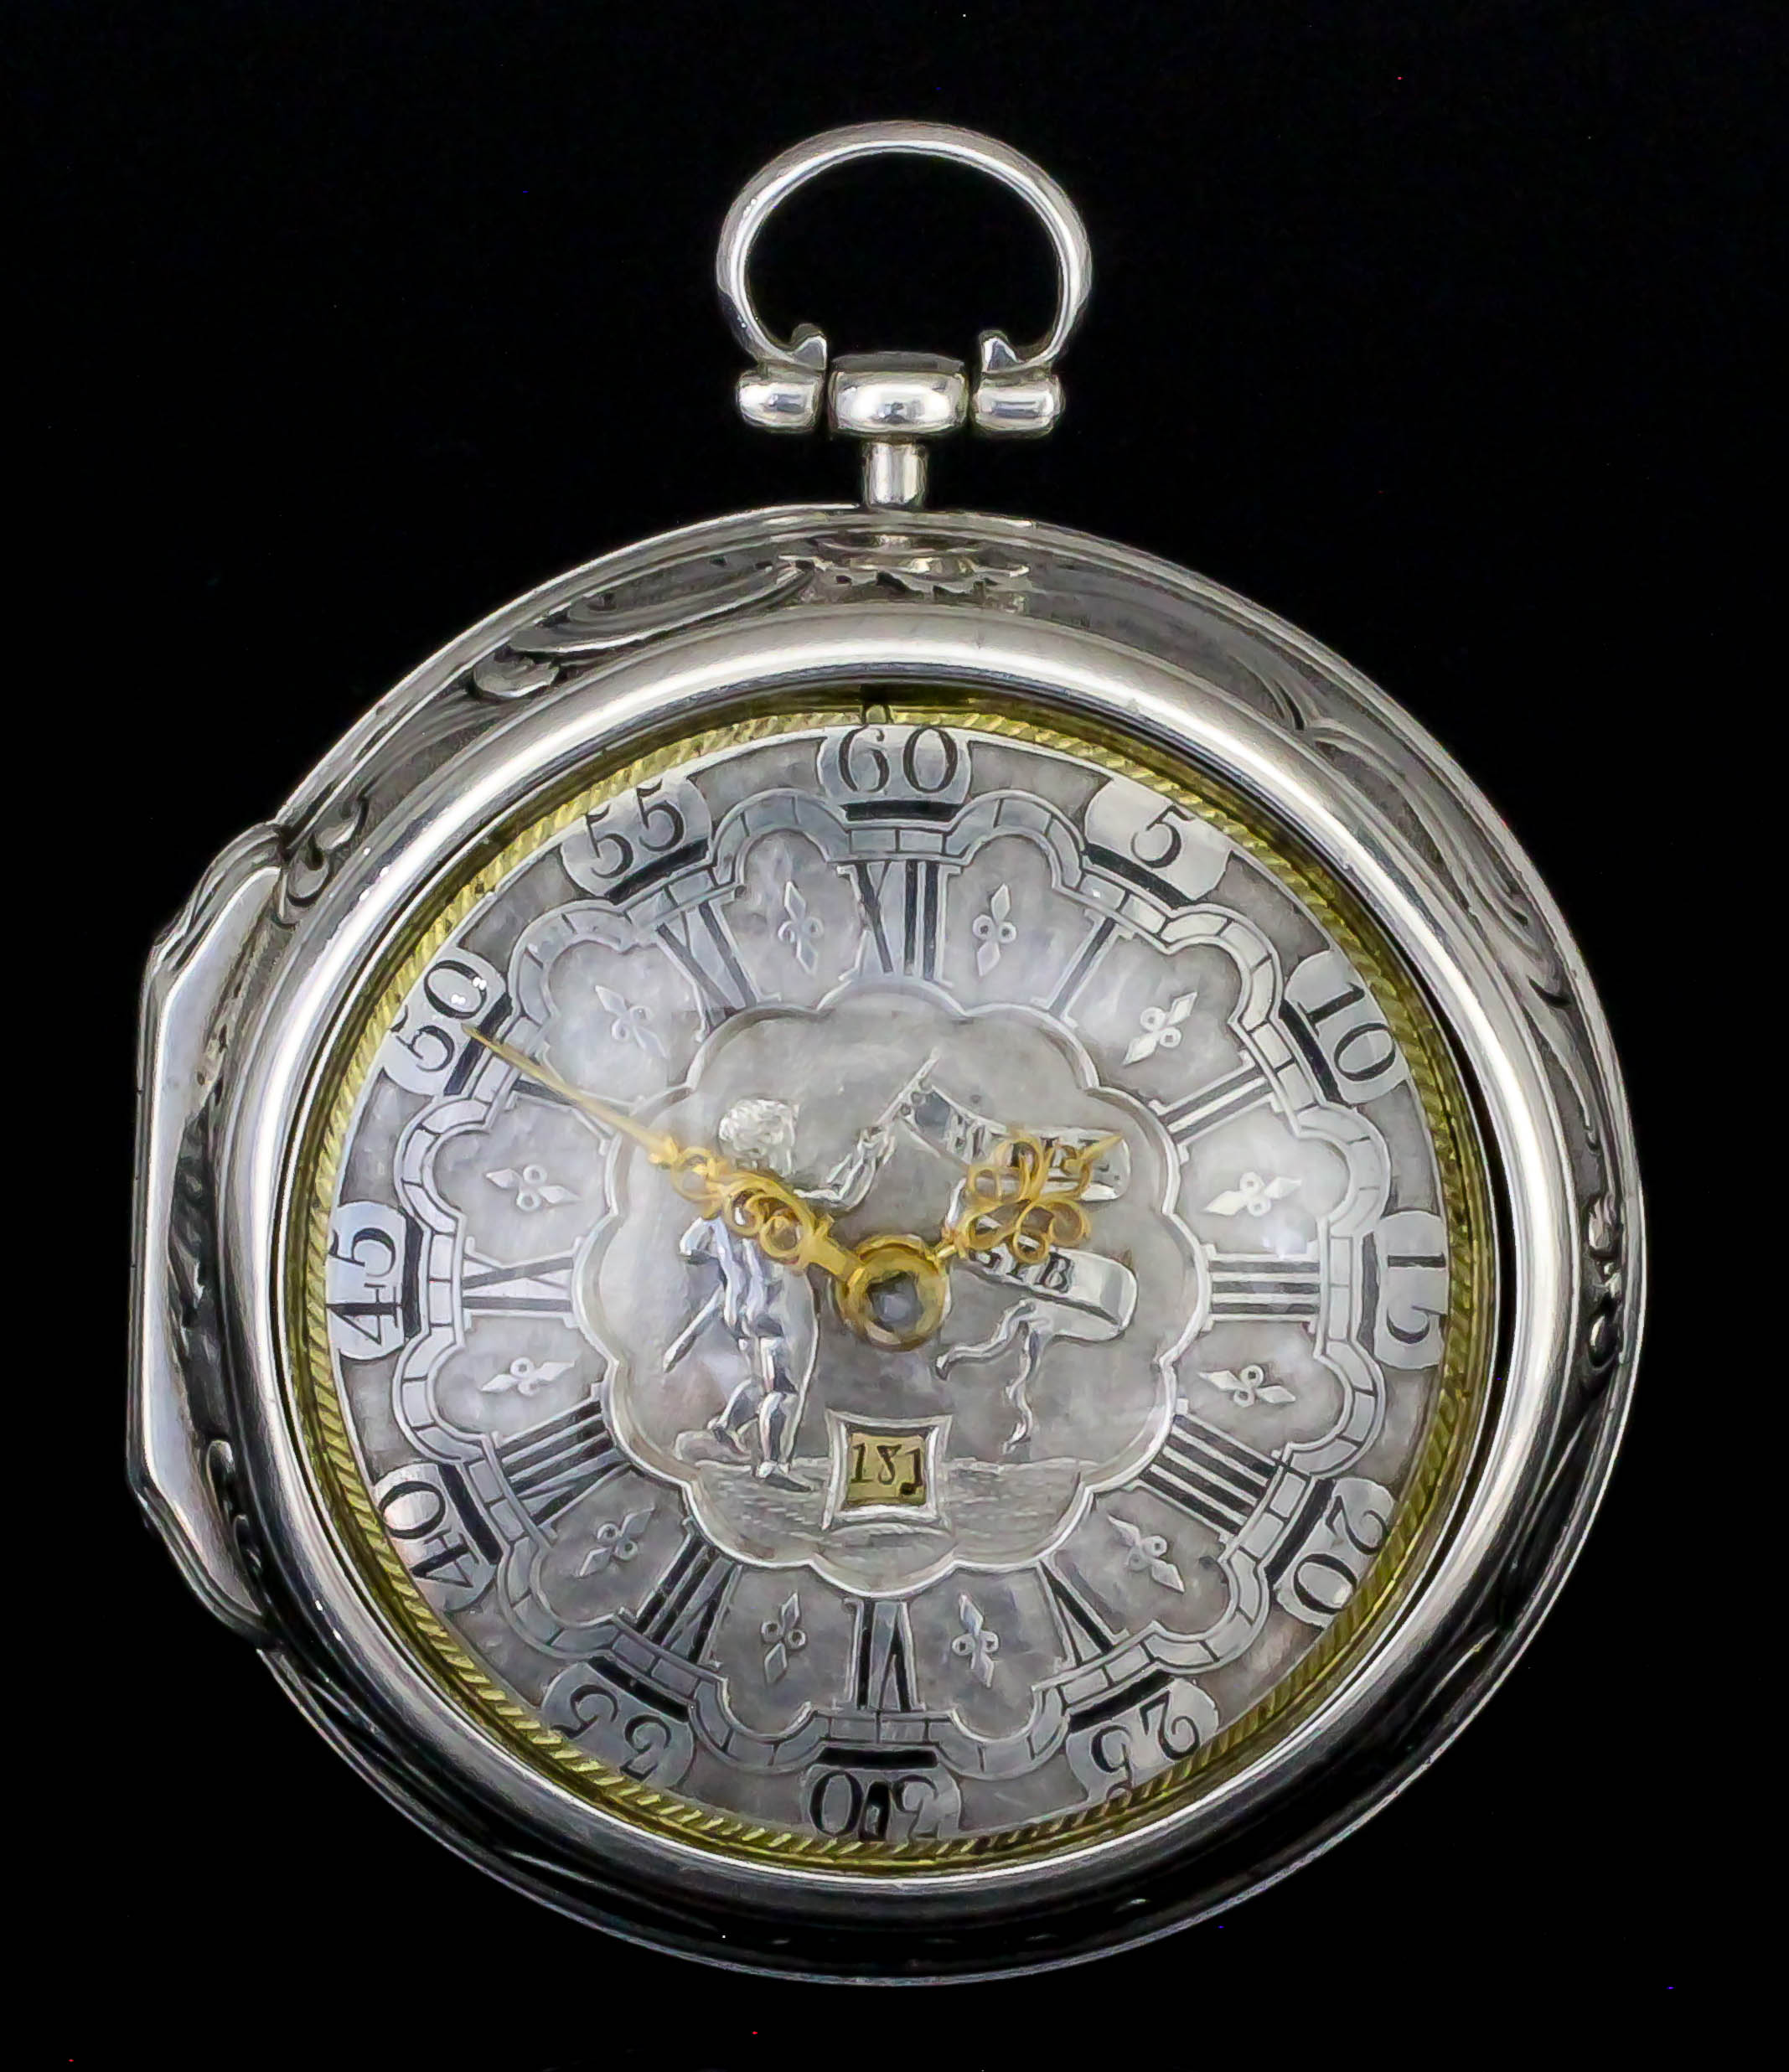 An unusual mid 18th Century silver pair cased verge pocket watch by William Gib of Rotterdam, No. - Image 4 of 5